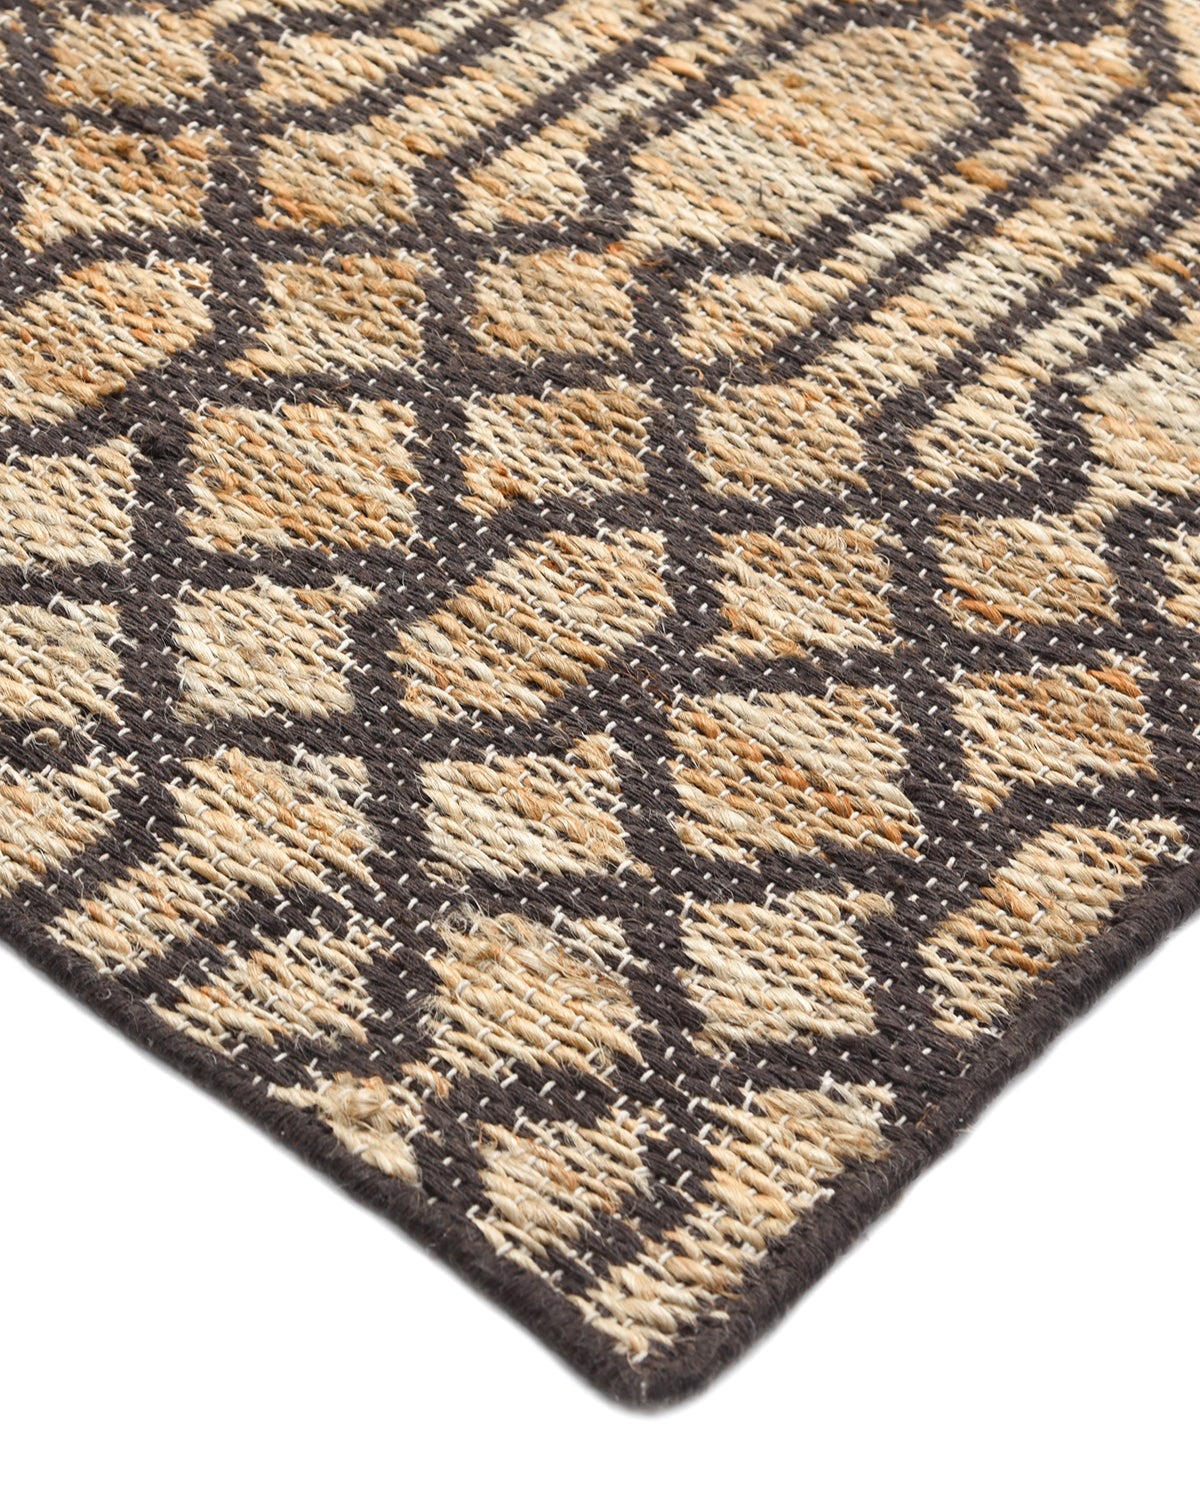 Sophie Hand Woven Contemporary Transitional Jute Area Rug